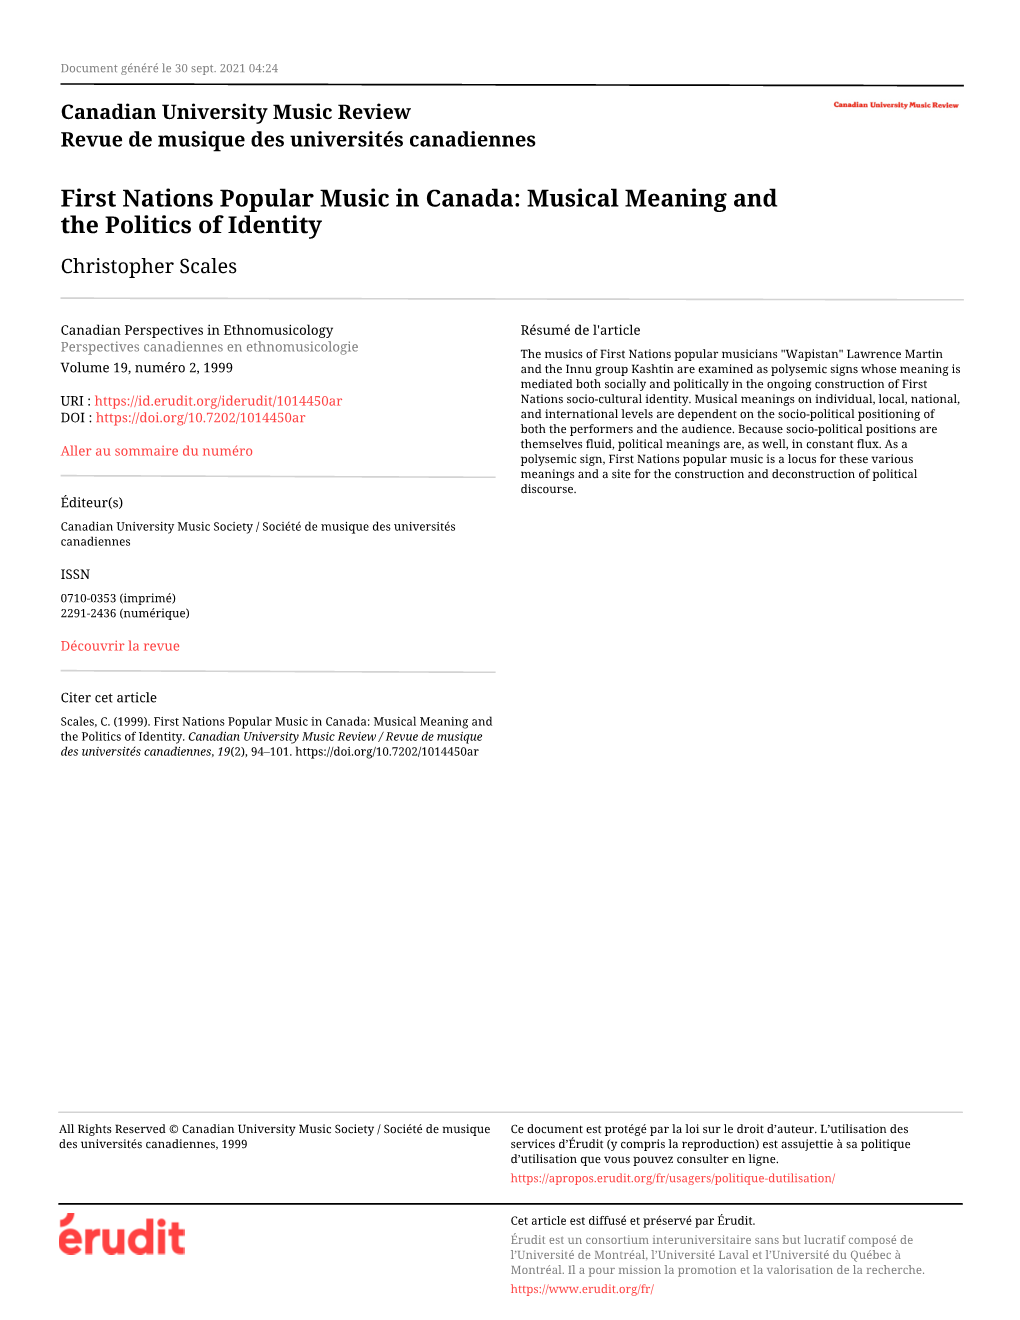 First Nations Popular Music in Canada: Musical Meaning and the Politics of Identity Christopher Scales